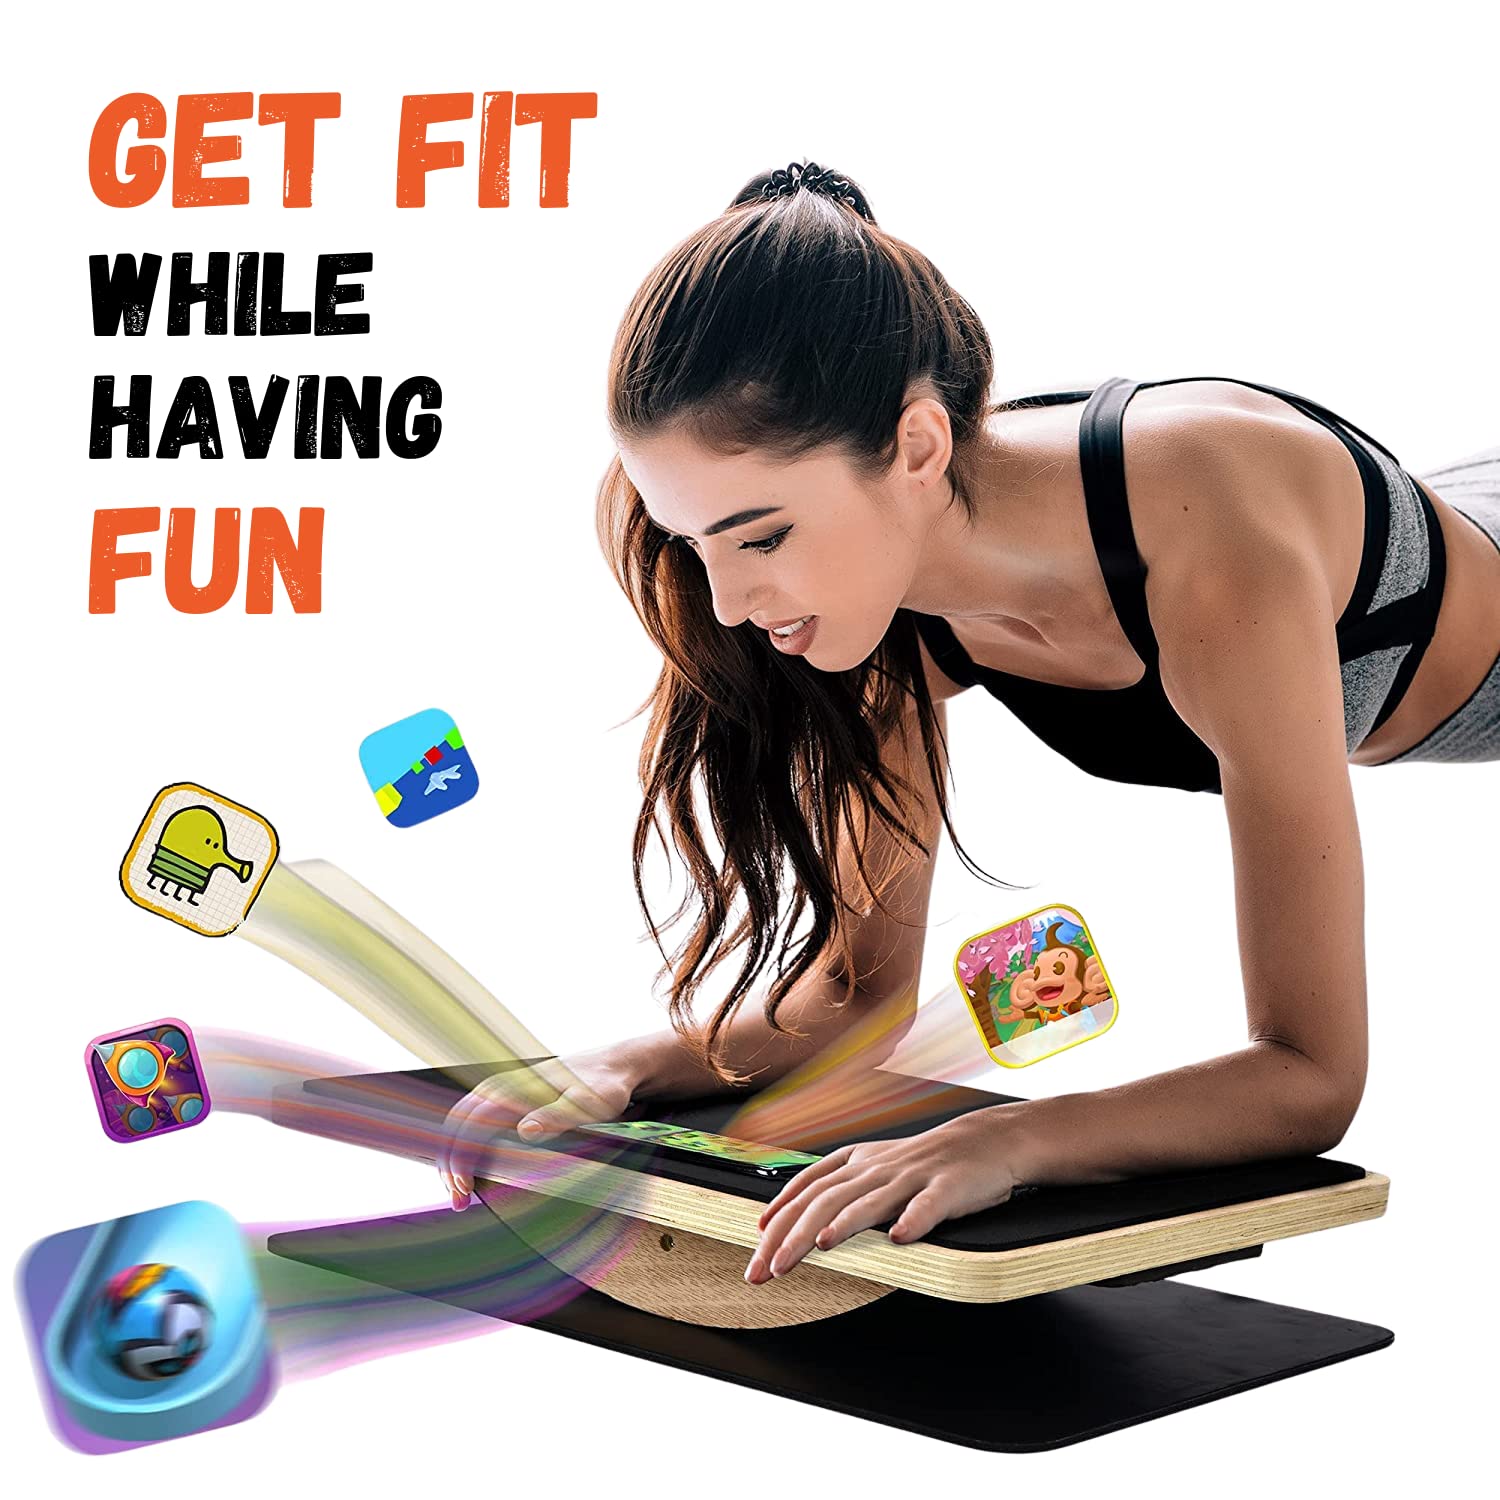 Yes4All Versatile Plank Trainer Board with Smartphone Integration for Full Body Fitness while Playing Games, Watching Videos - Comfy EVA Surface, Anti-Slip Anti-Scratch Pads